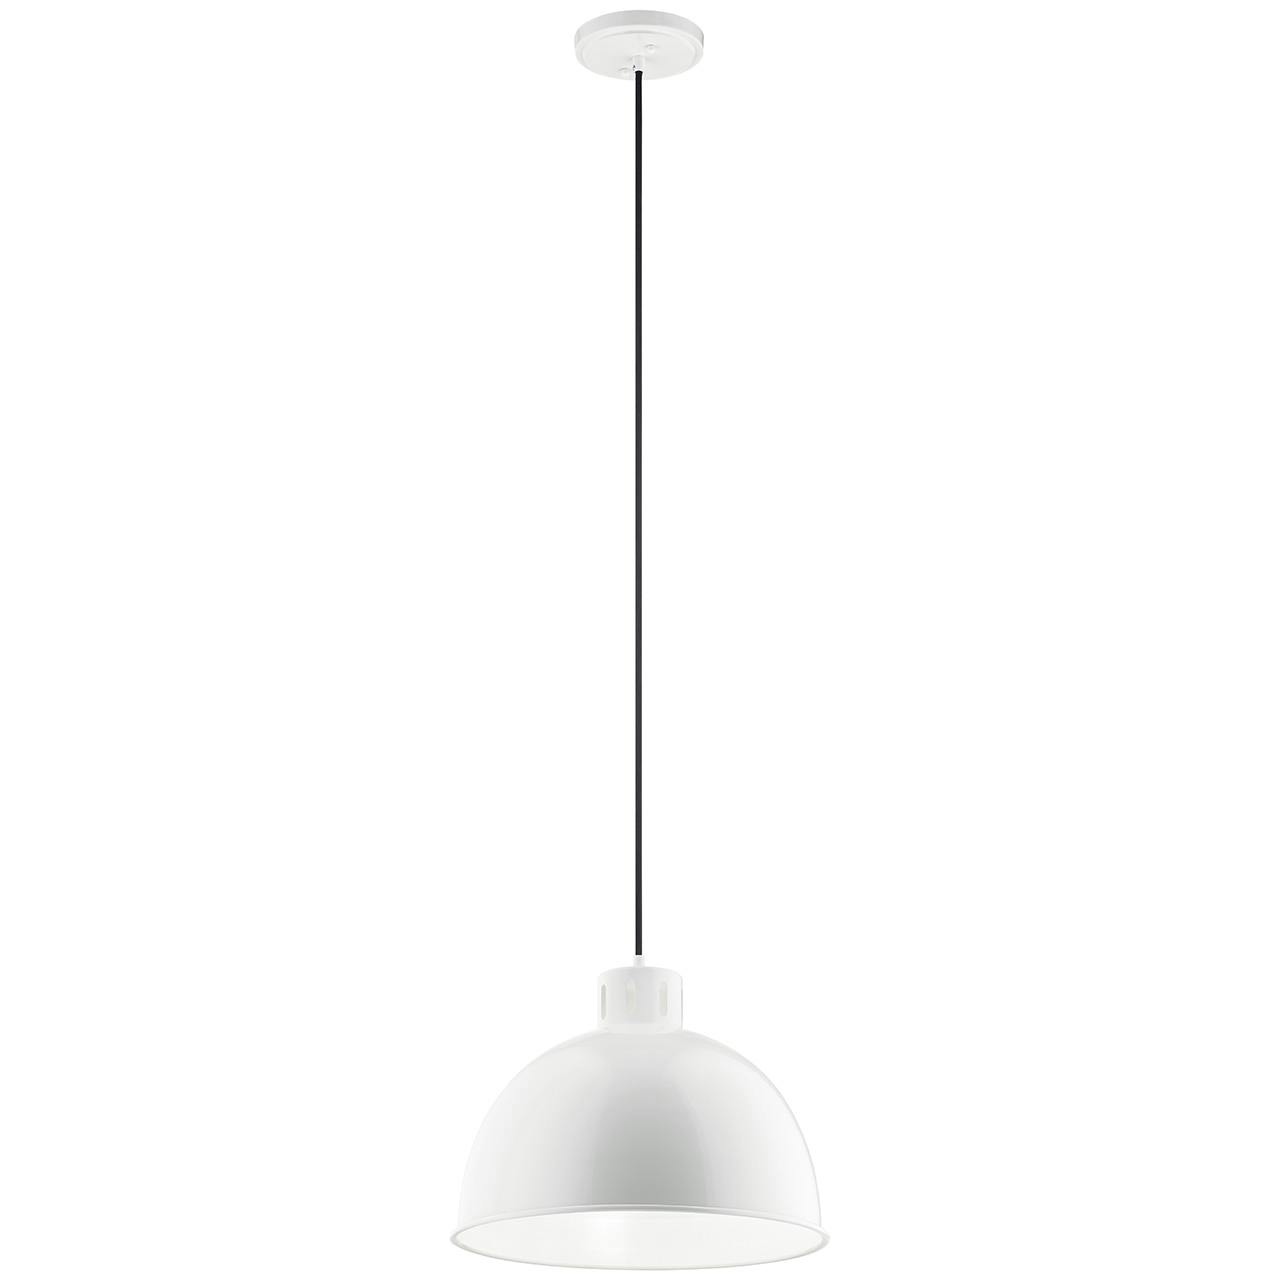 Zailey™ 15.75" 1 Light Pendant in White on a white background